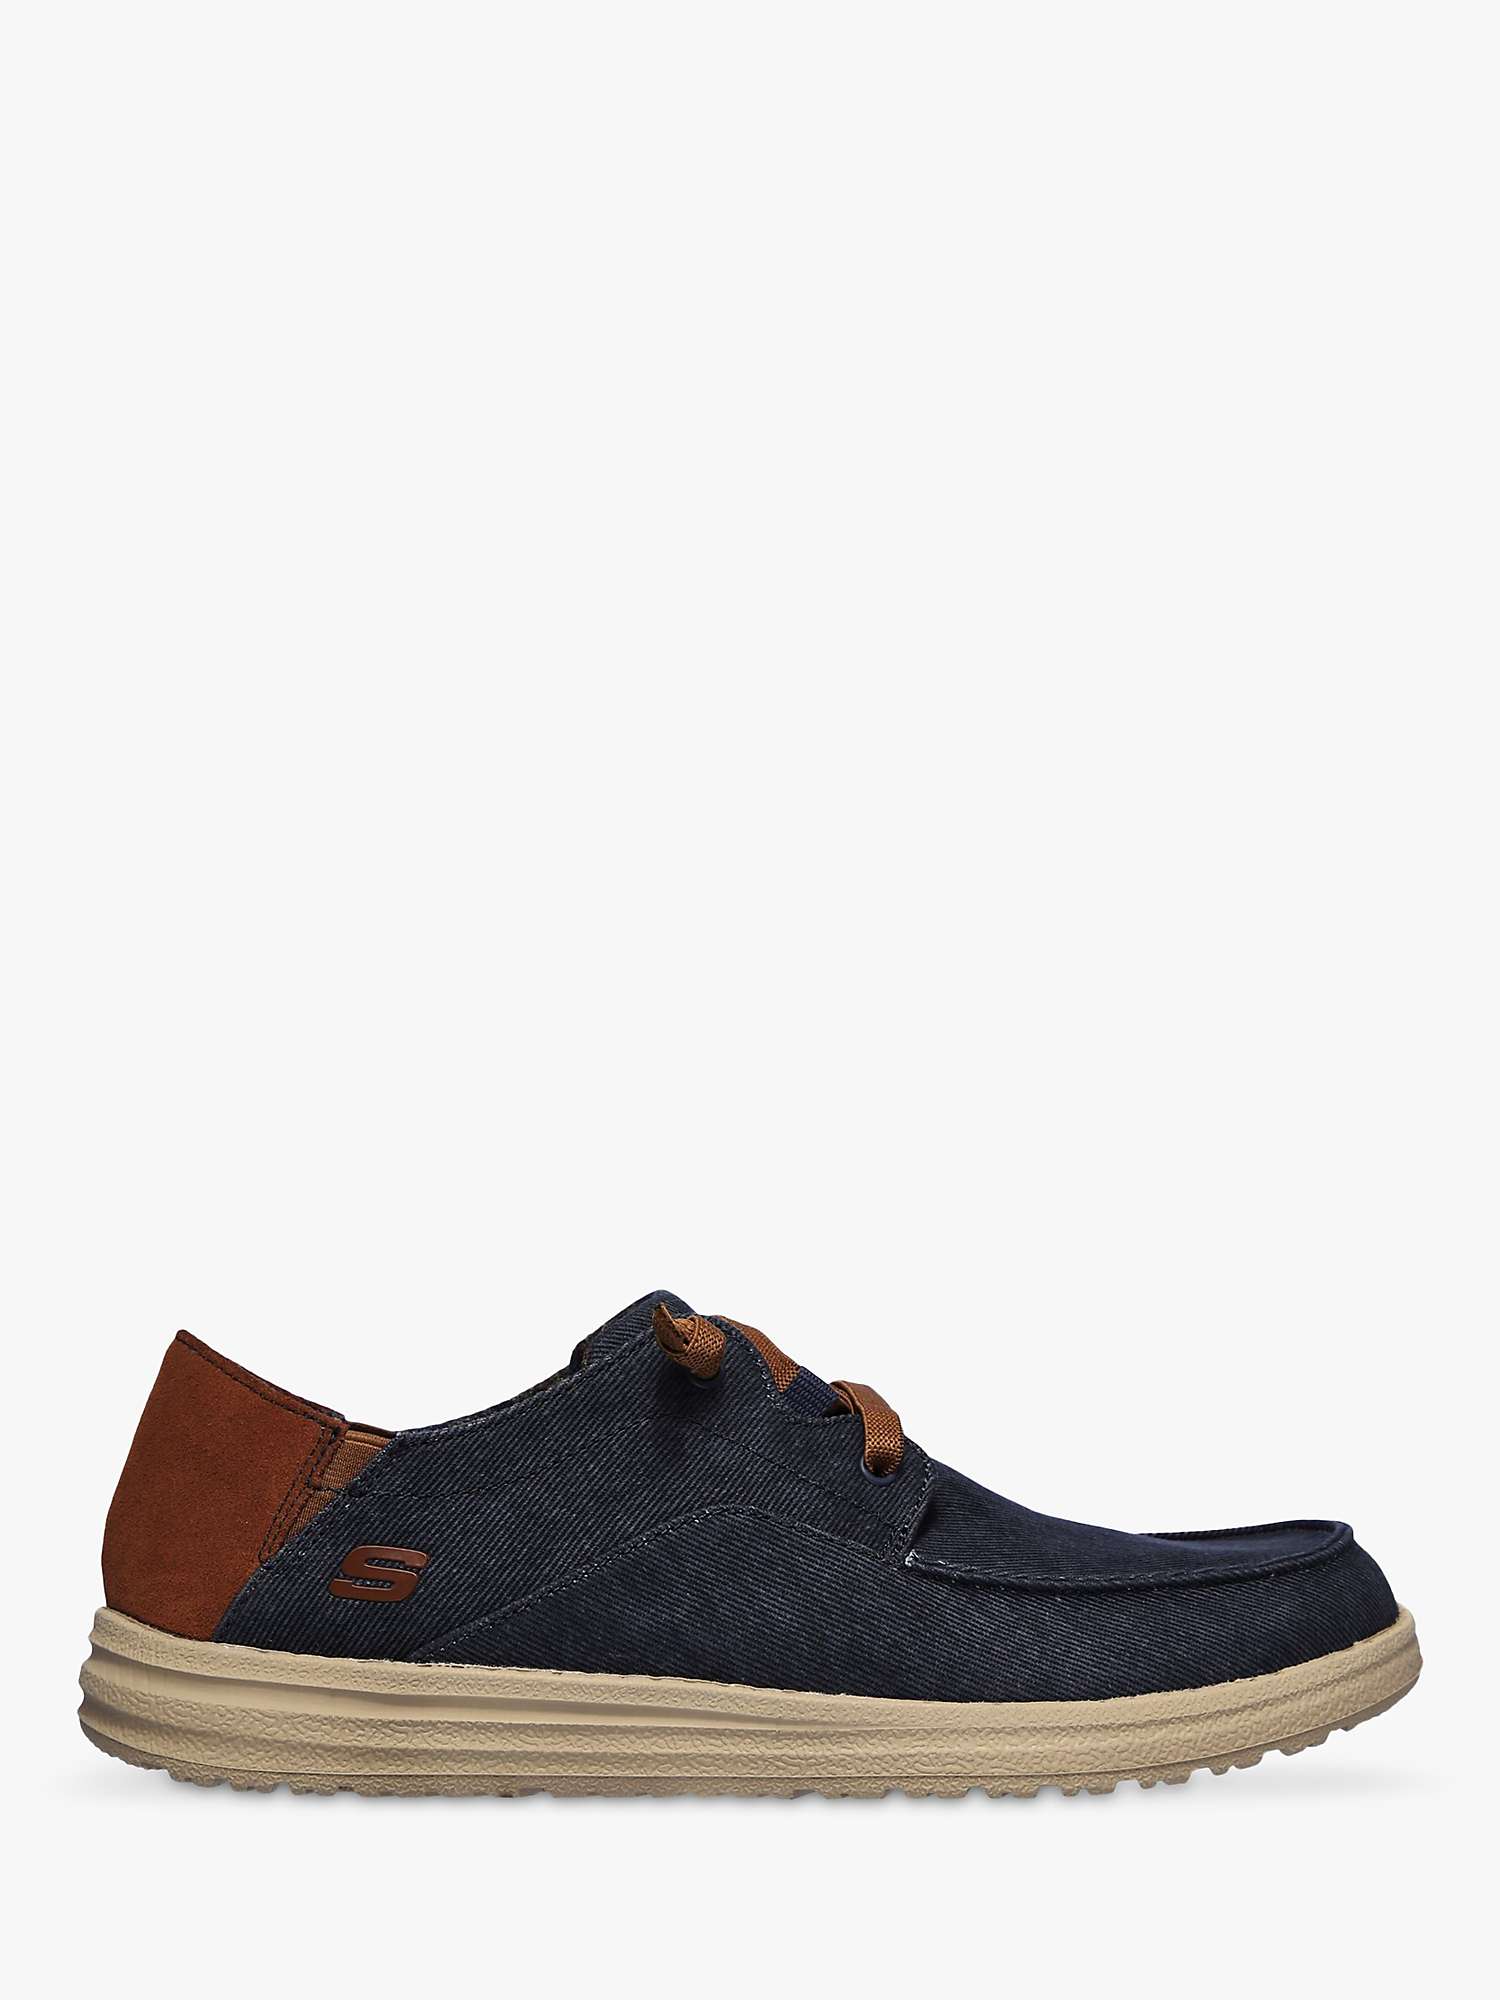 Buy Skechers Melson Planon Lace Up Trainers, Navy Online at johnlewis.com